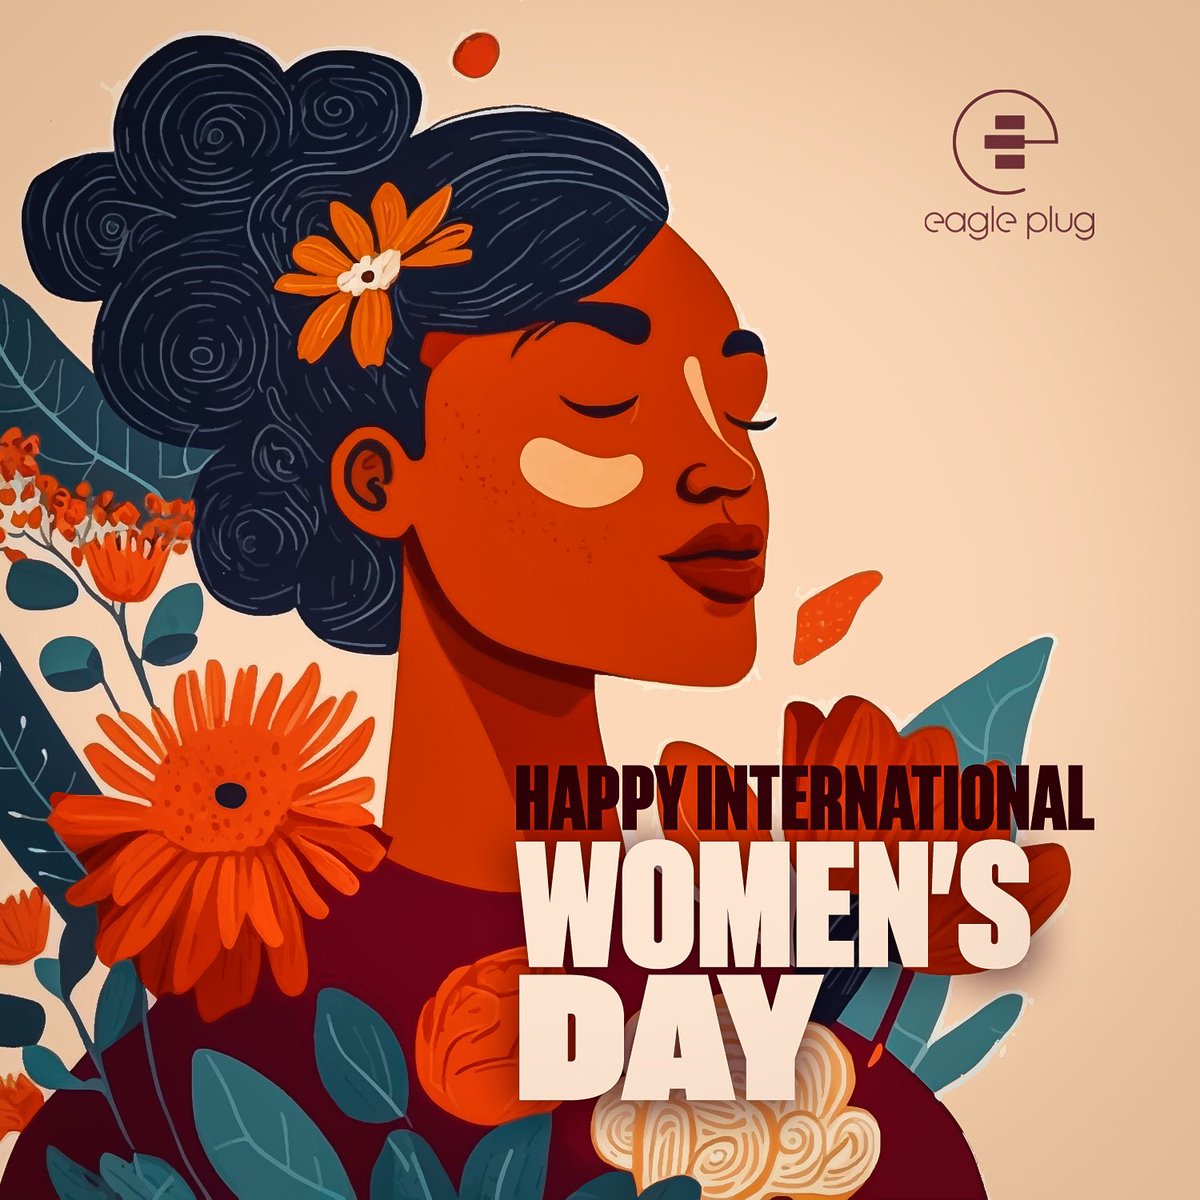 Happy International Women’s Day #IWD ❤️ Today, and every day, we celebrate resilience, strength and achievements of women worldwide. Women continue to inspire with their courage and determination. Let’s honour the amazing contributions of women 💕#InternationalWomensDay